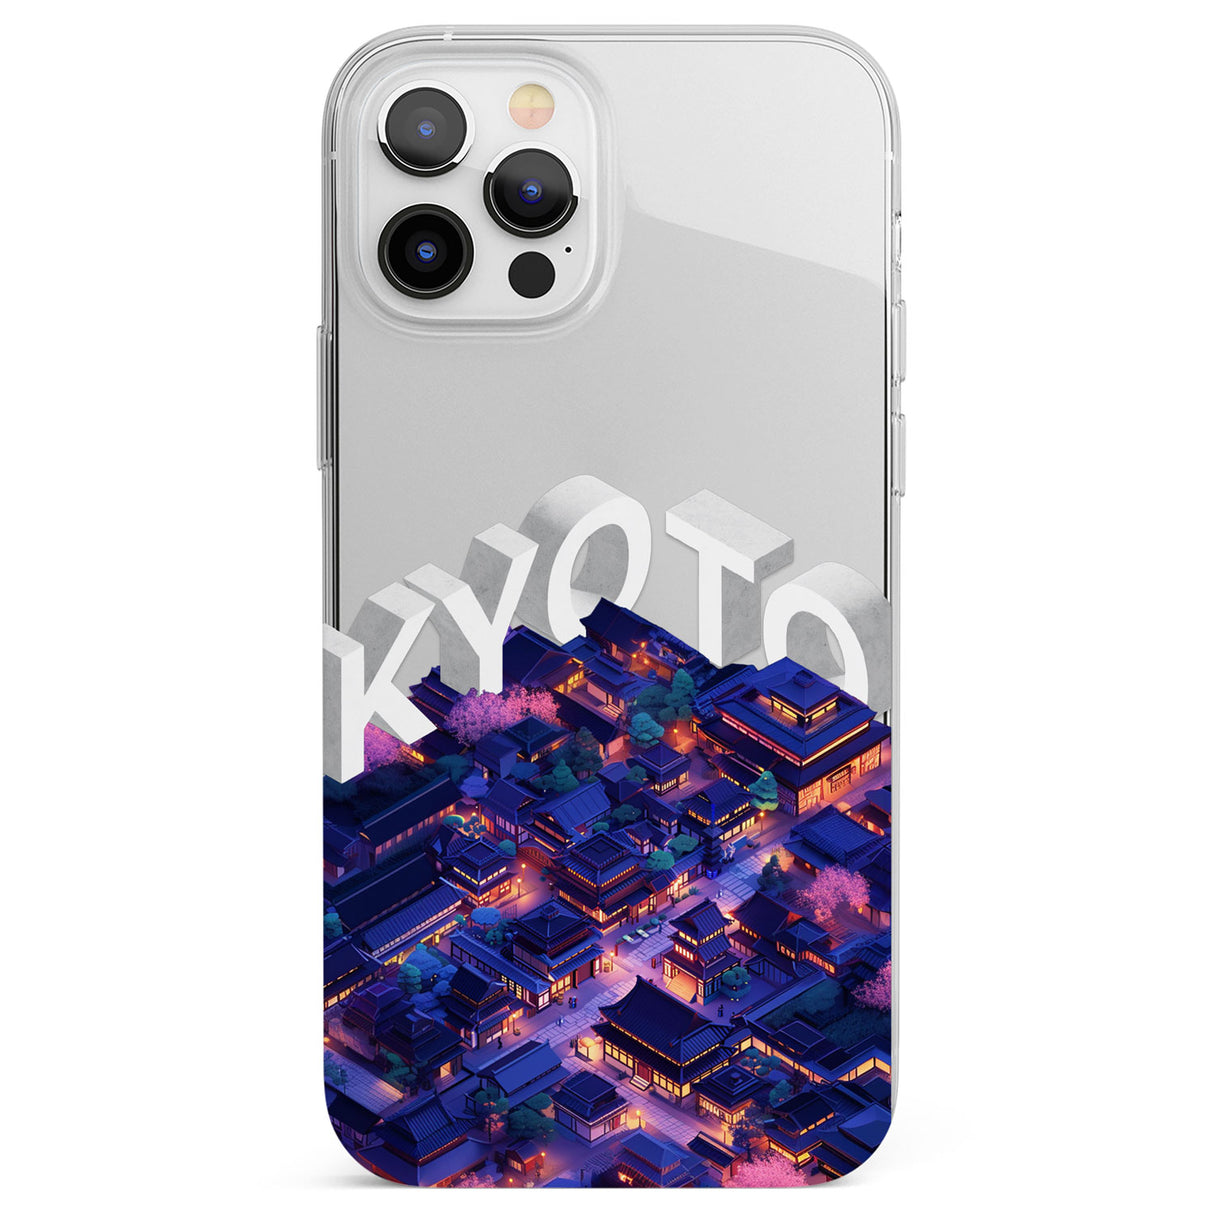 Kyoto Phone Case for iPhone 12 Pro